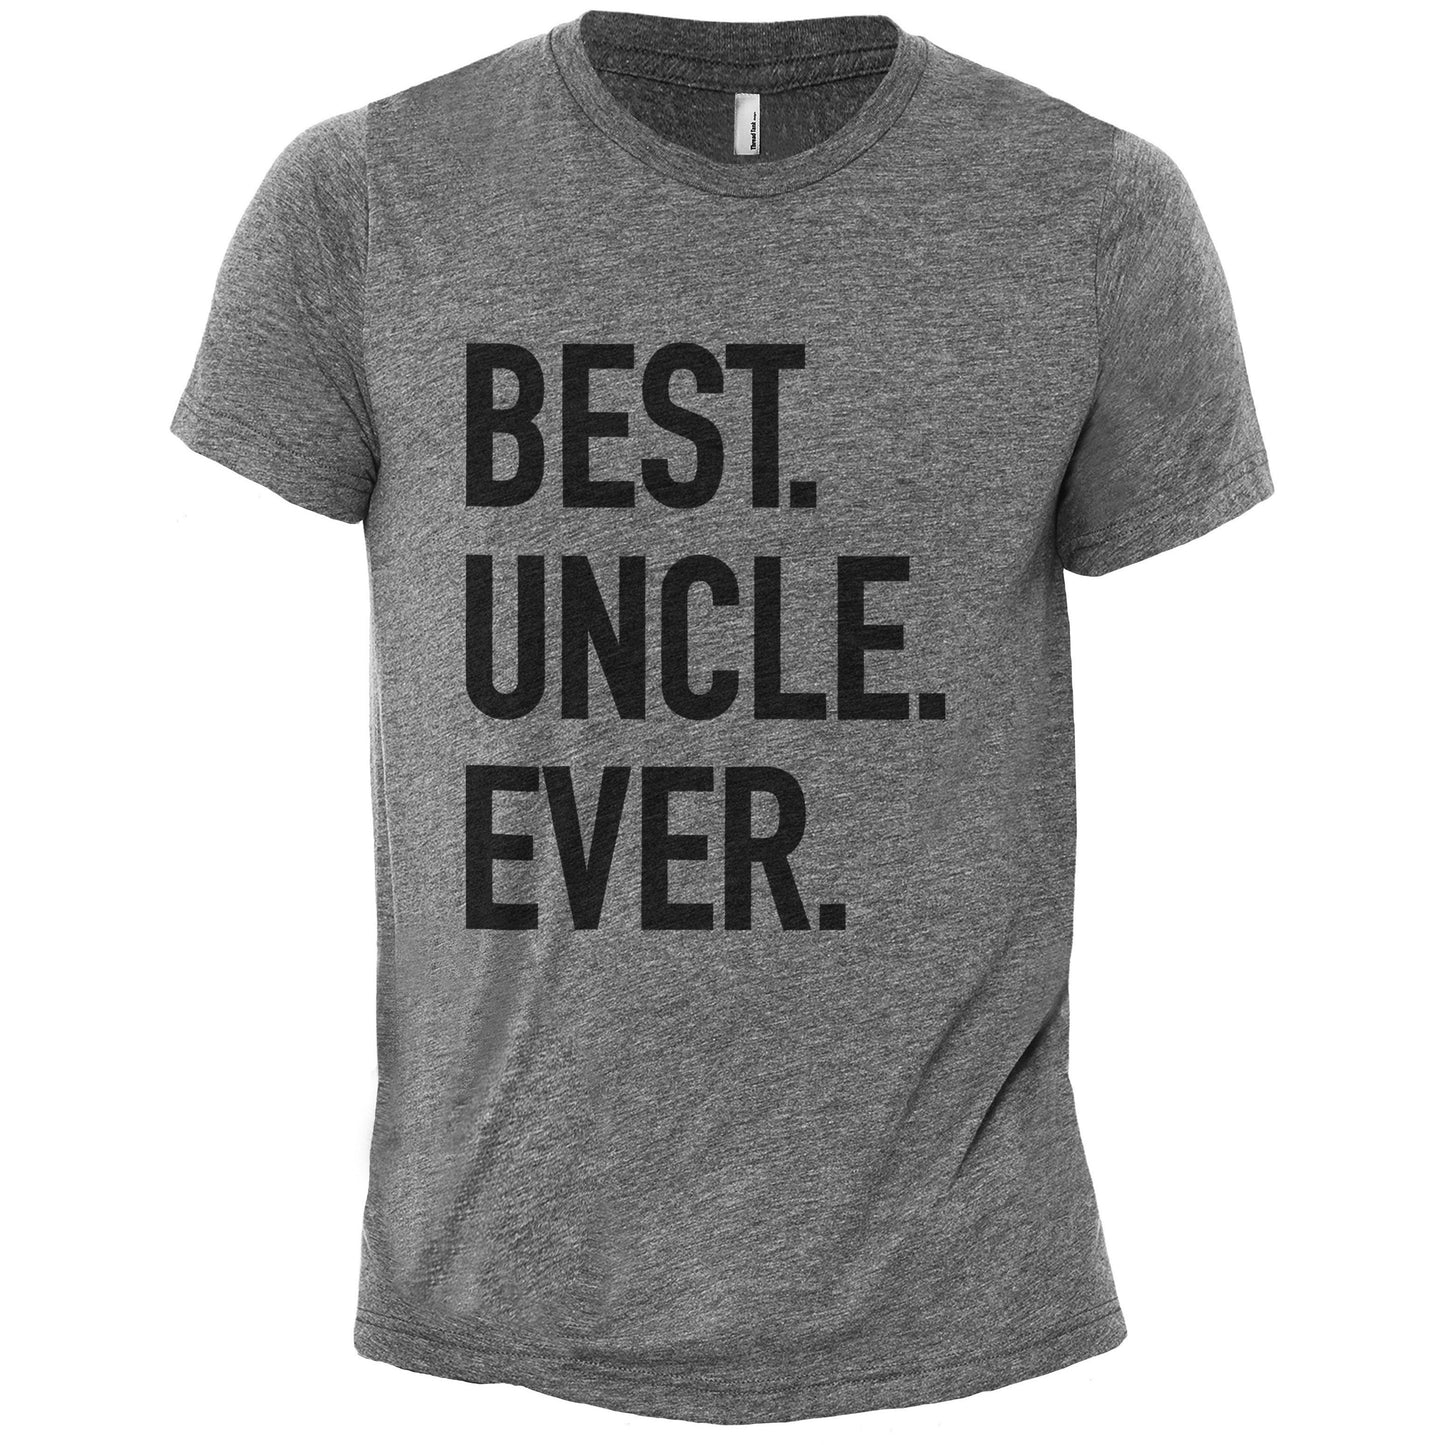 Best Uncle Ever Heather Grey Printed Graphic Men's Crew T-Shirt Tee